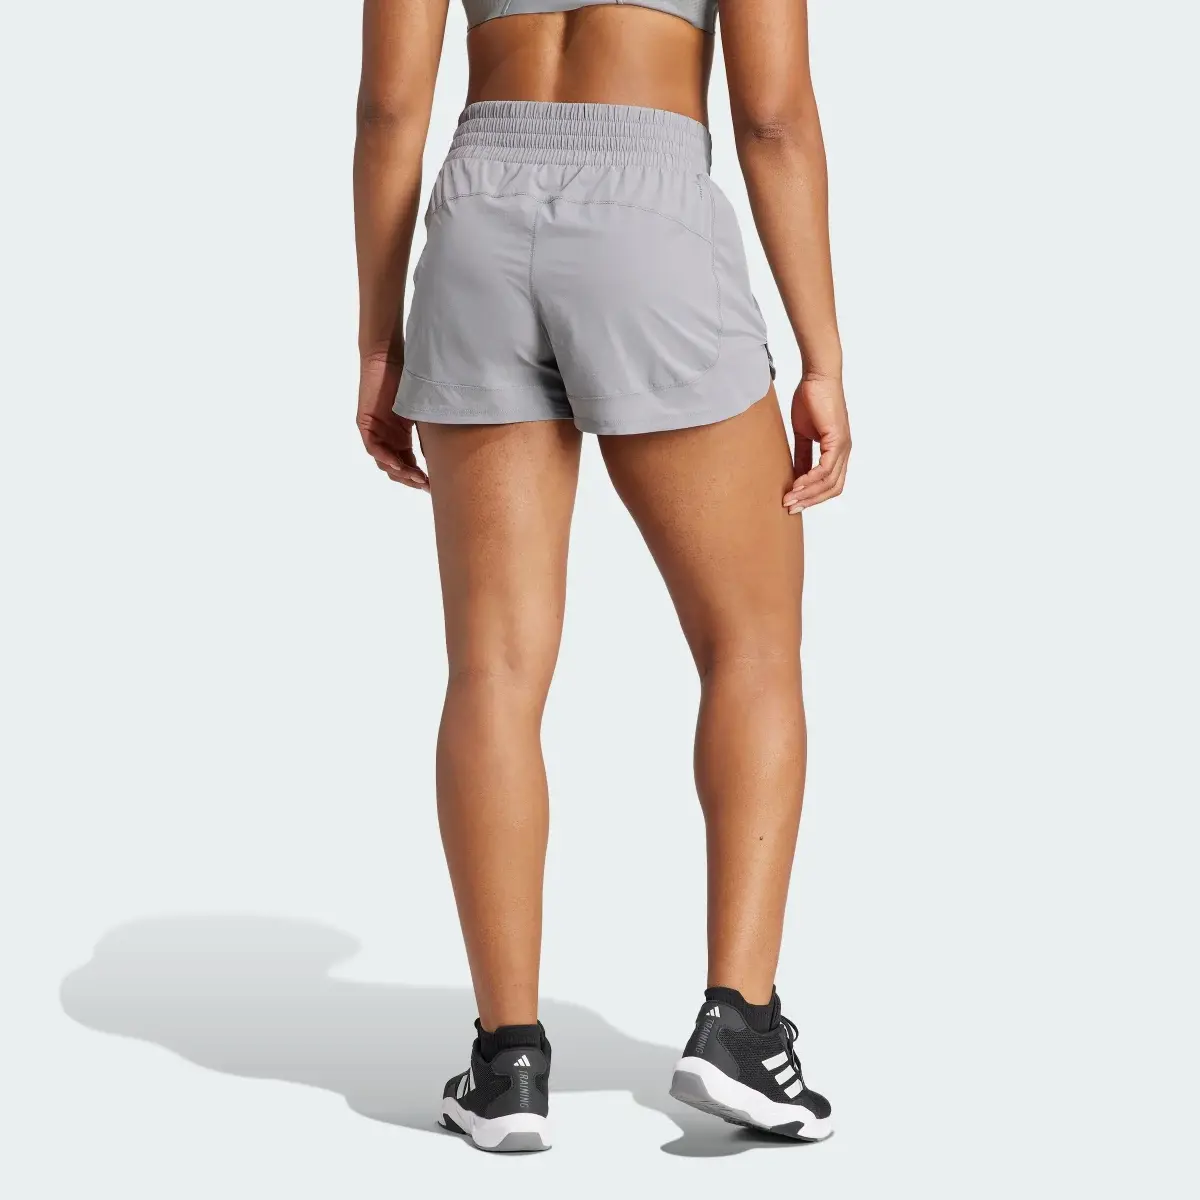 Adidas Pacer Stretch-Woven Zipper Pocket Lux Shorts. 2